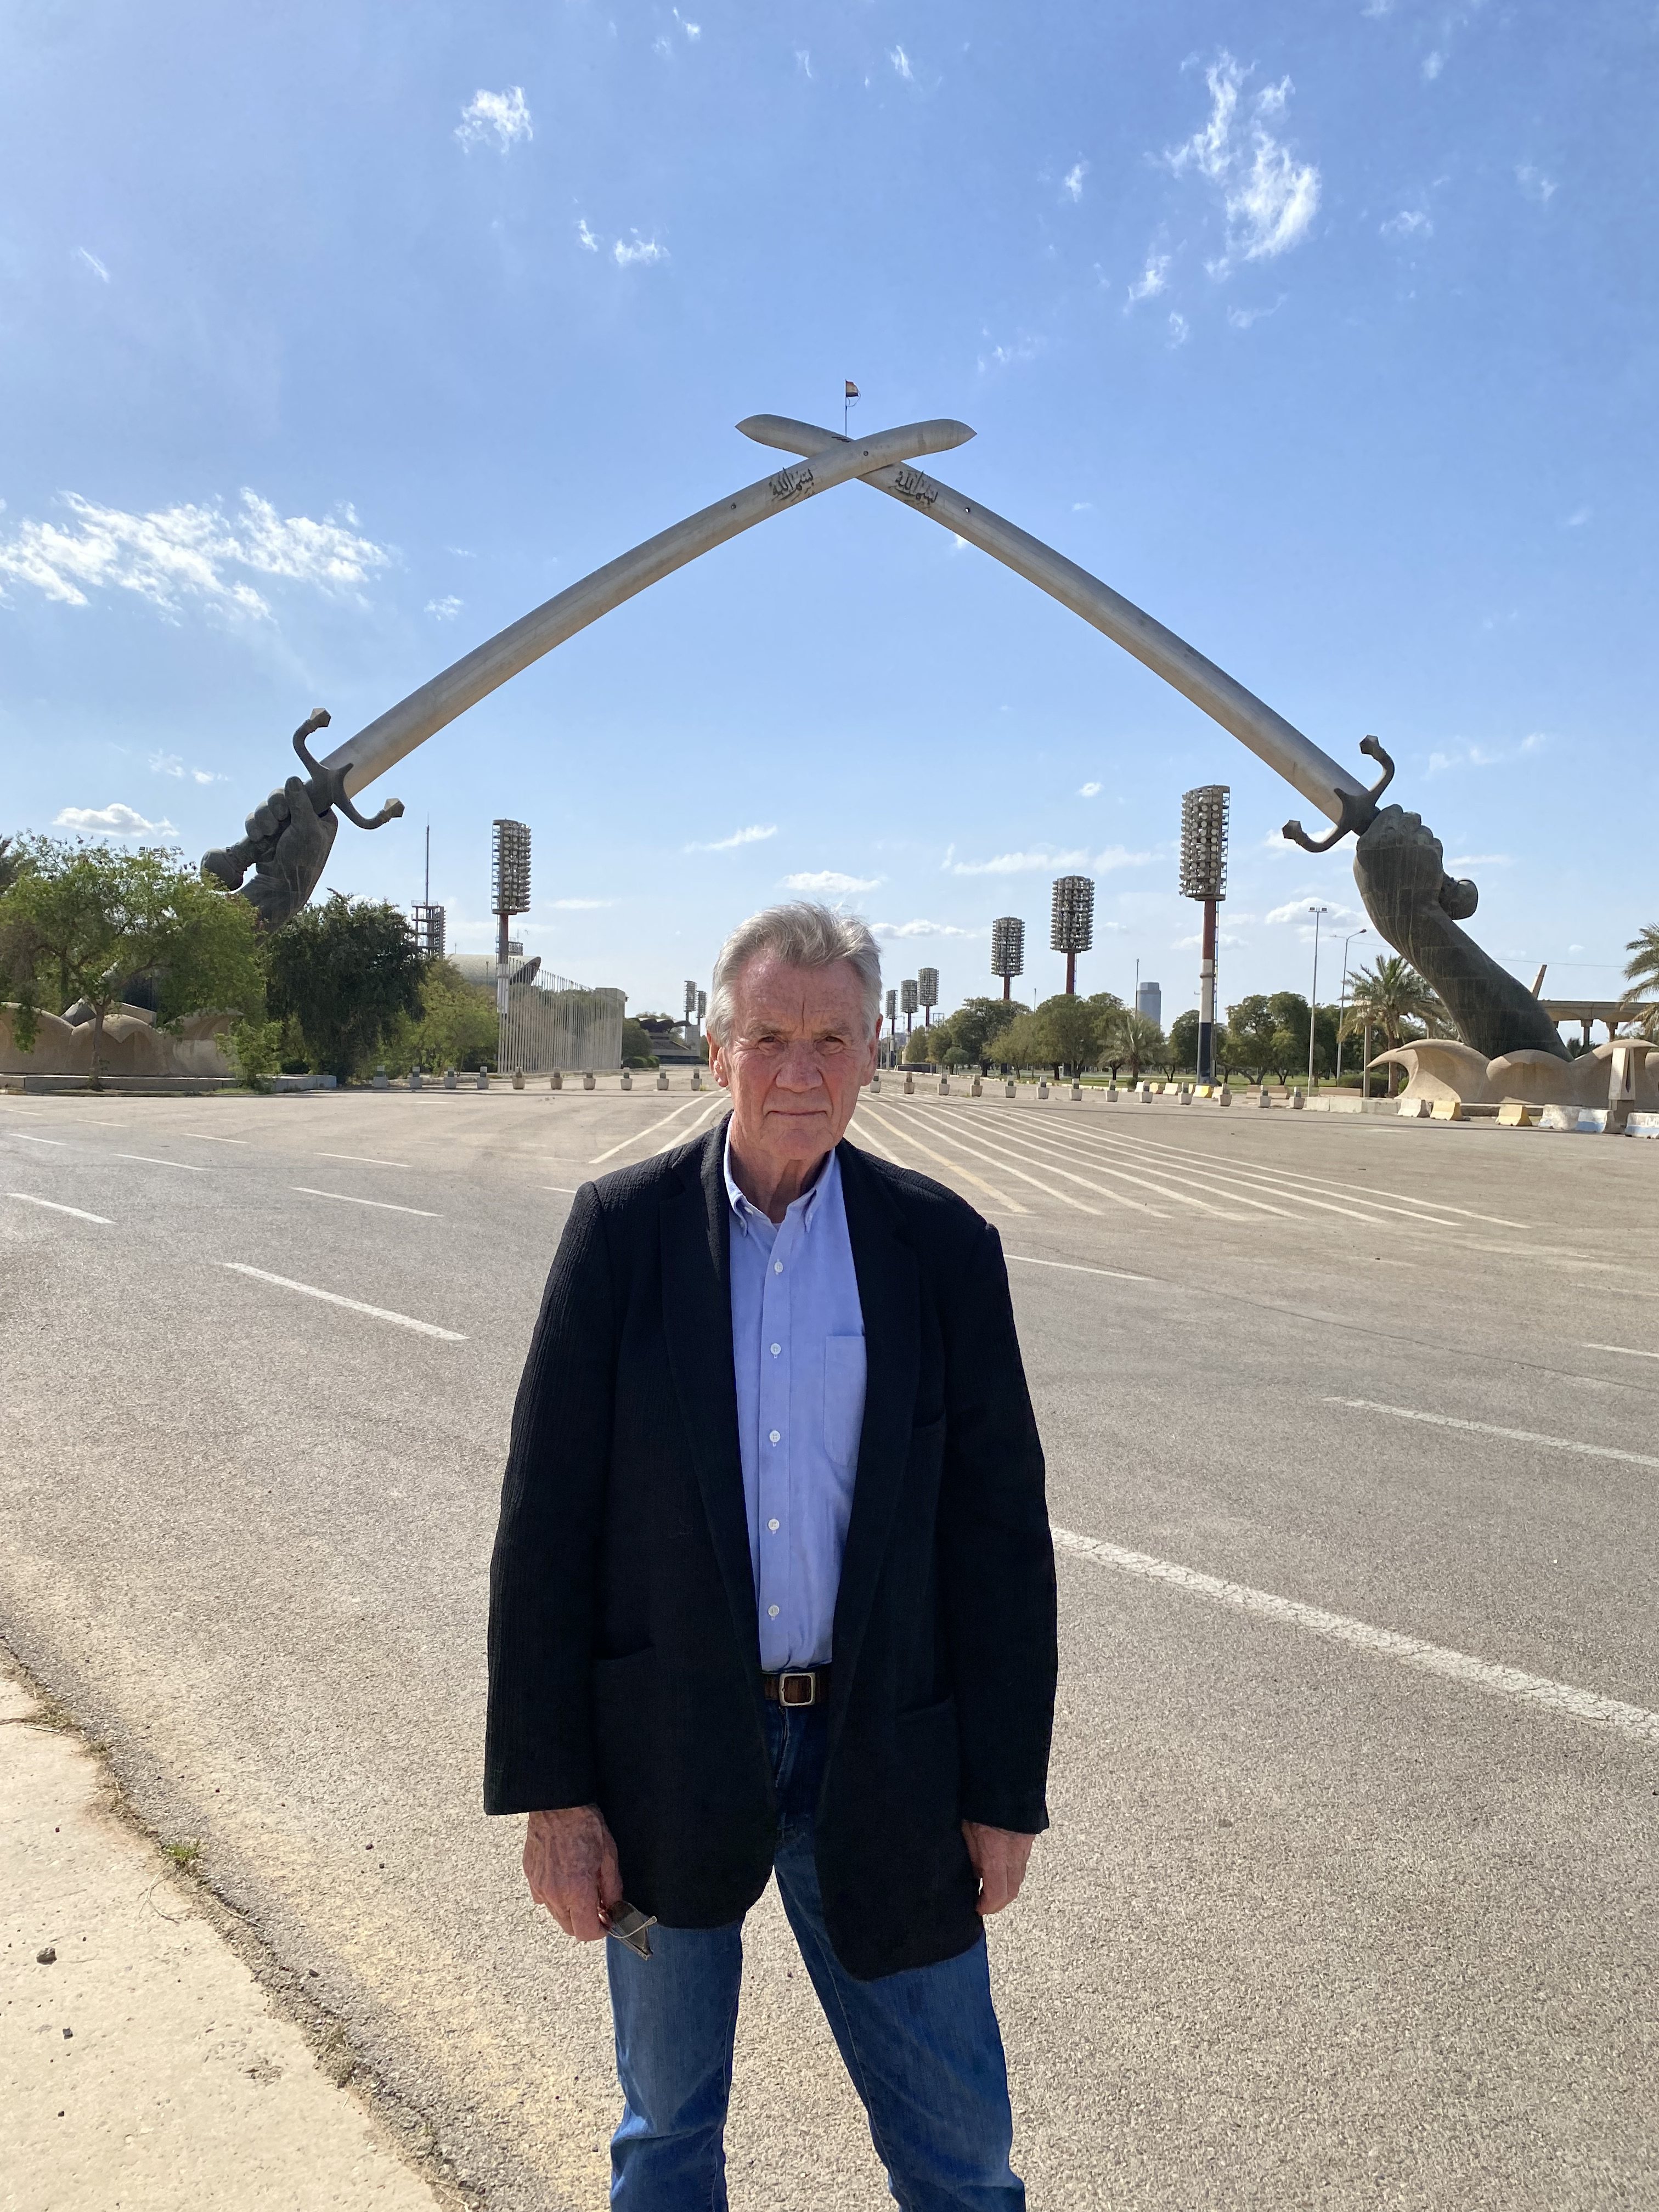 Michael Palin in front of the Victory Arch in Baghdad, Iraq in a still from BBC Earth’s “Michael Palin into Iraq”. Photo: ITN Productions/Doug Dreger